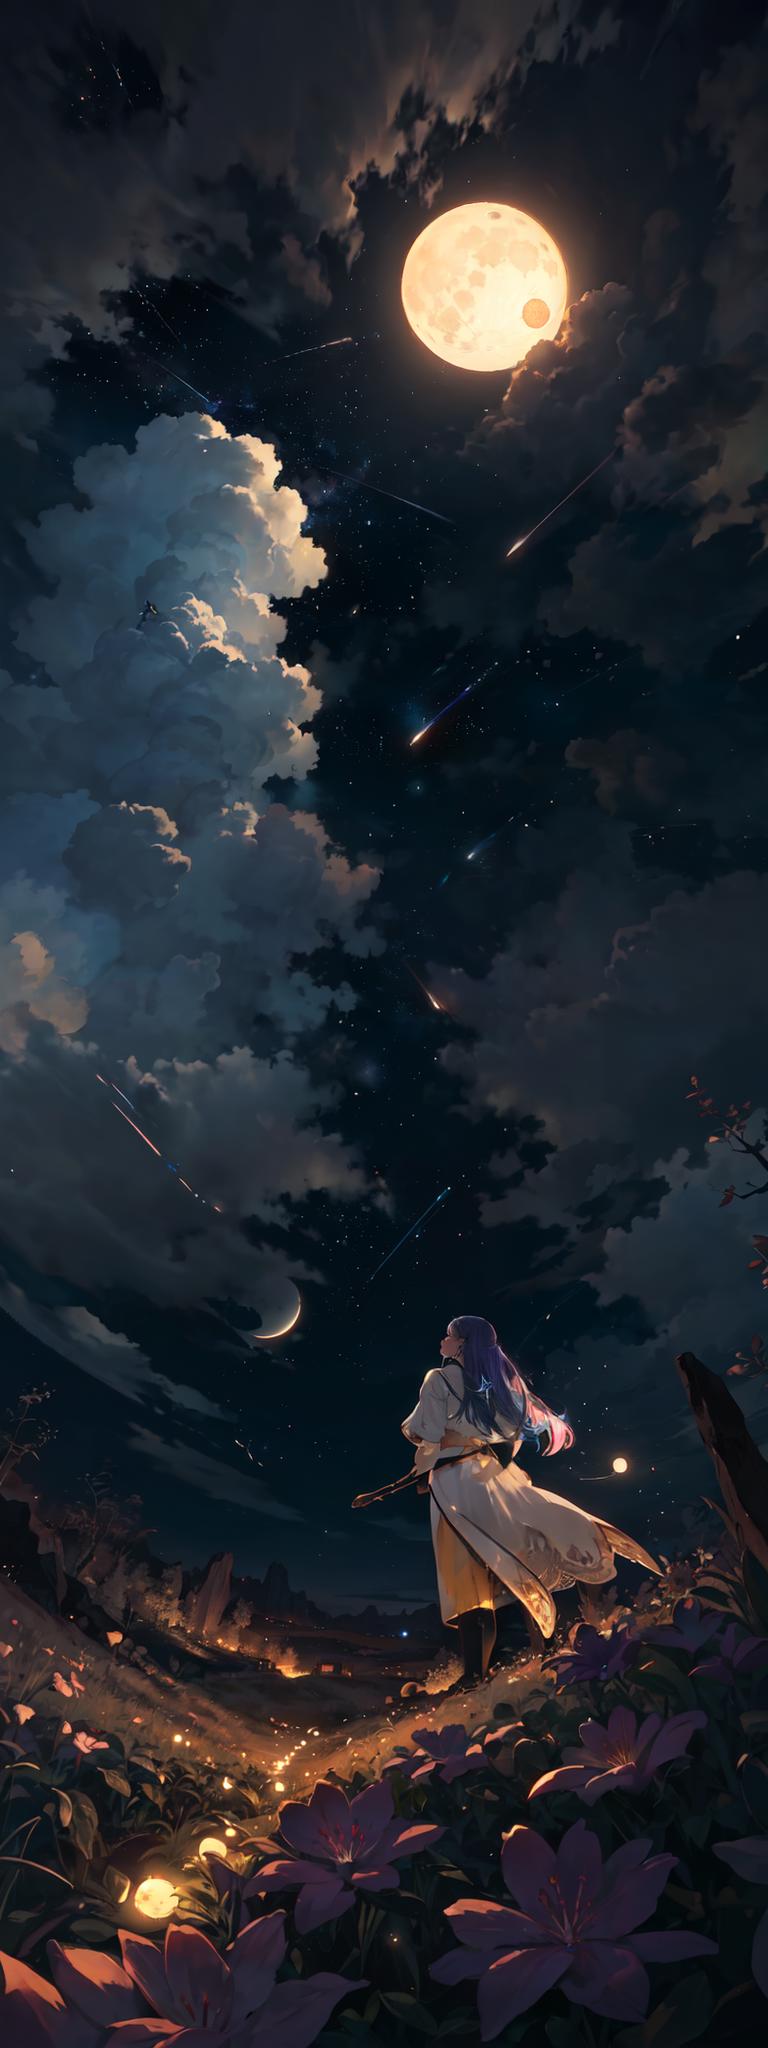 A girl looking up at the night sky with many stars and a crescent moon.